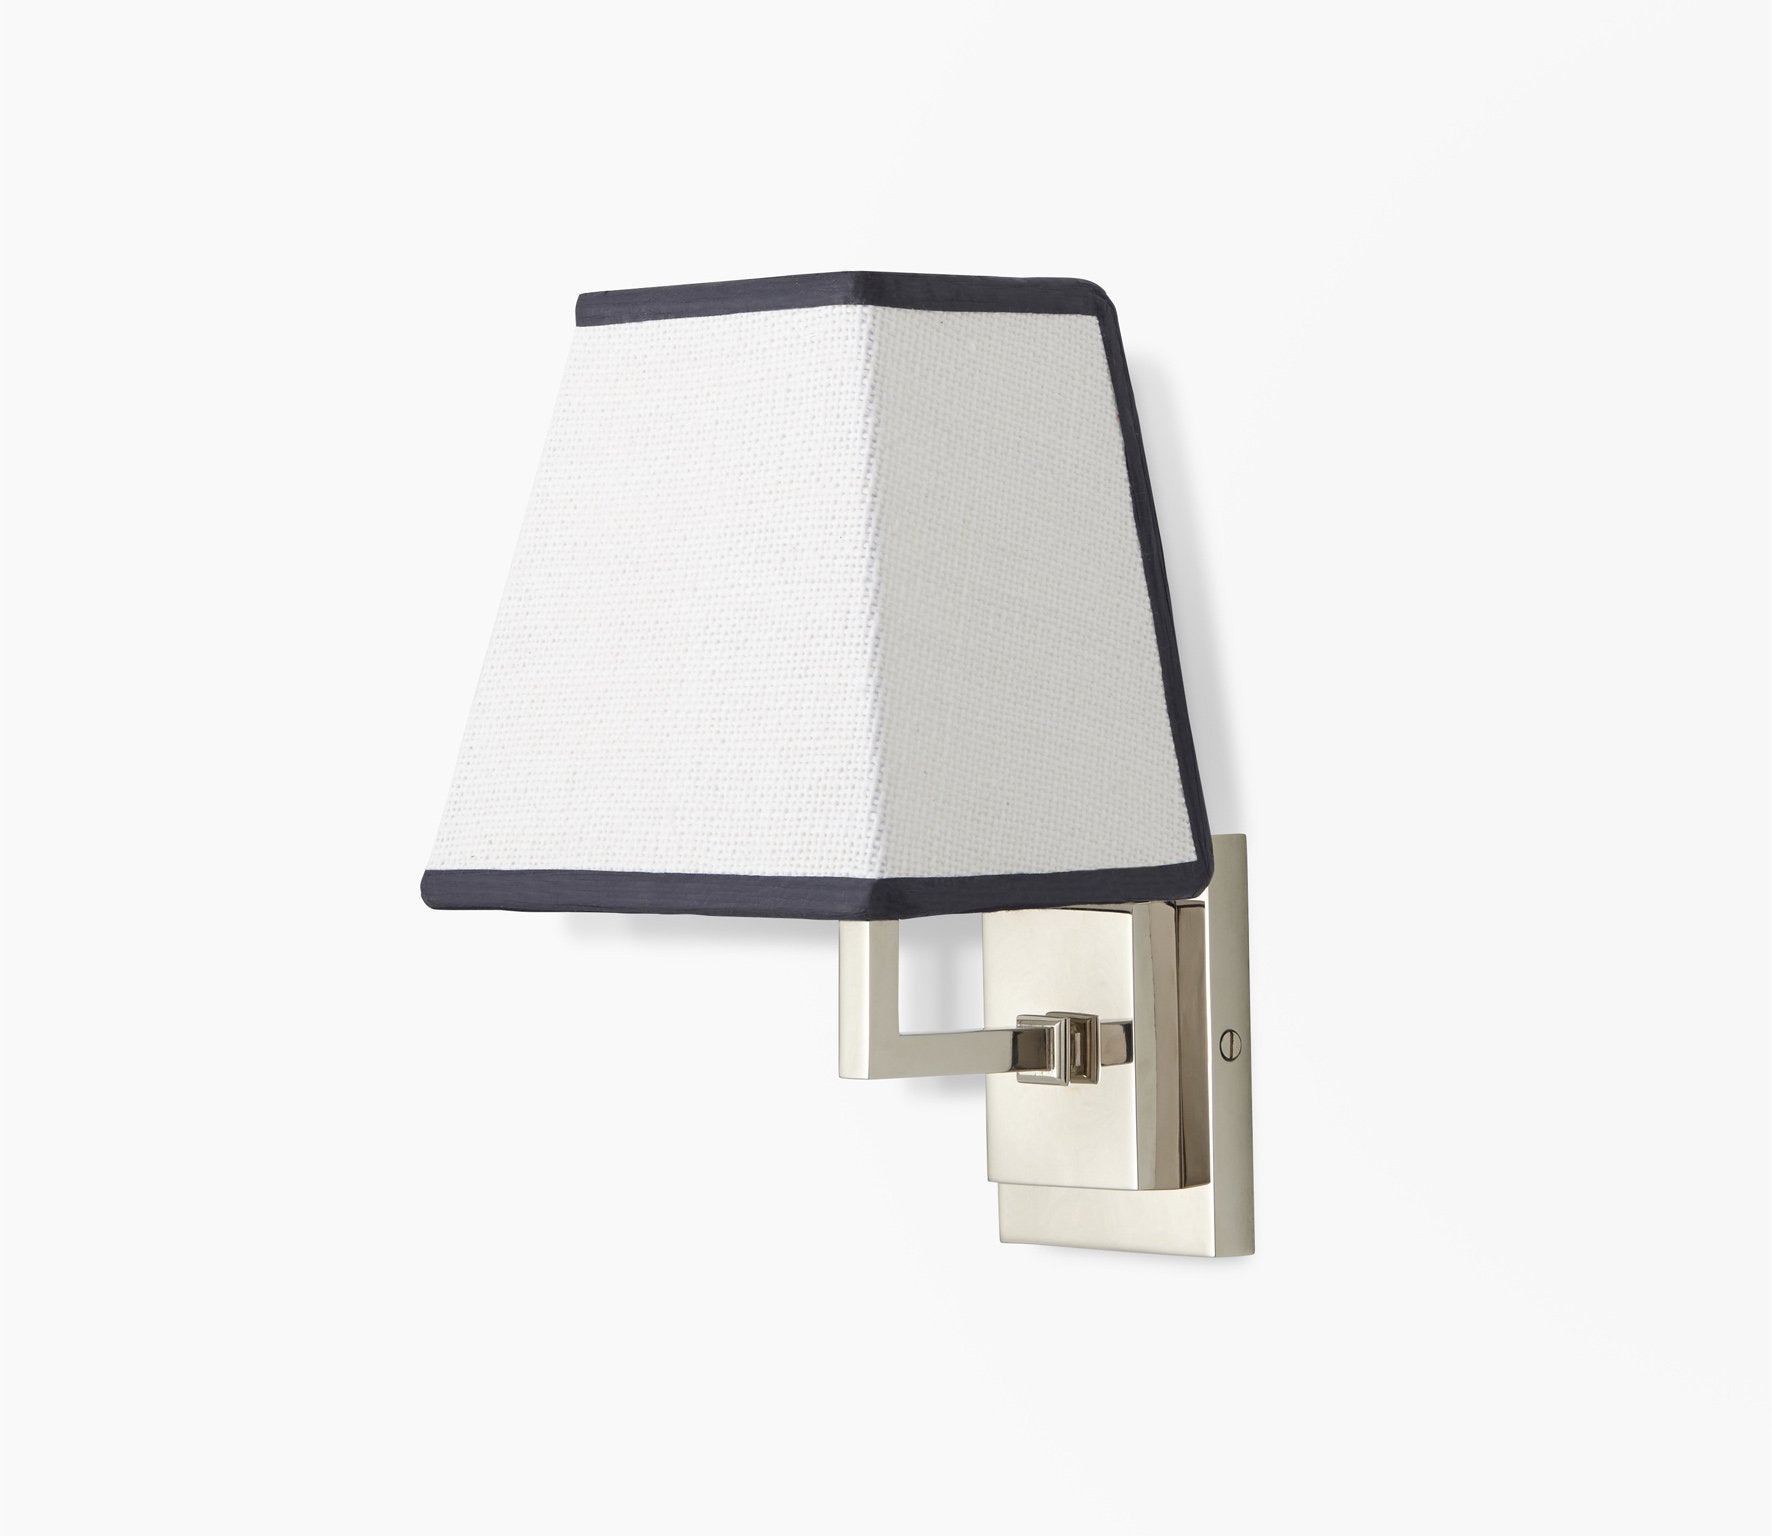 Parker Wall Light with Trapezoid Shade Product Image 2